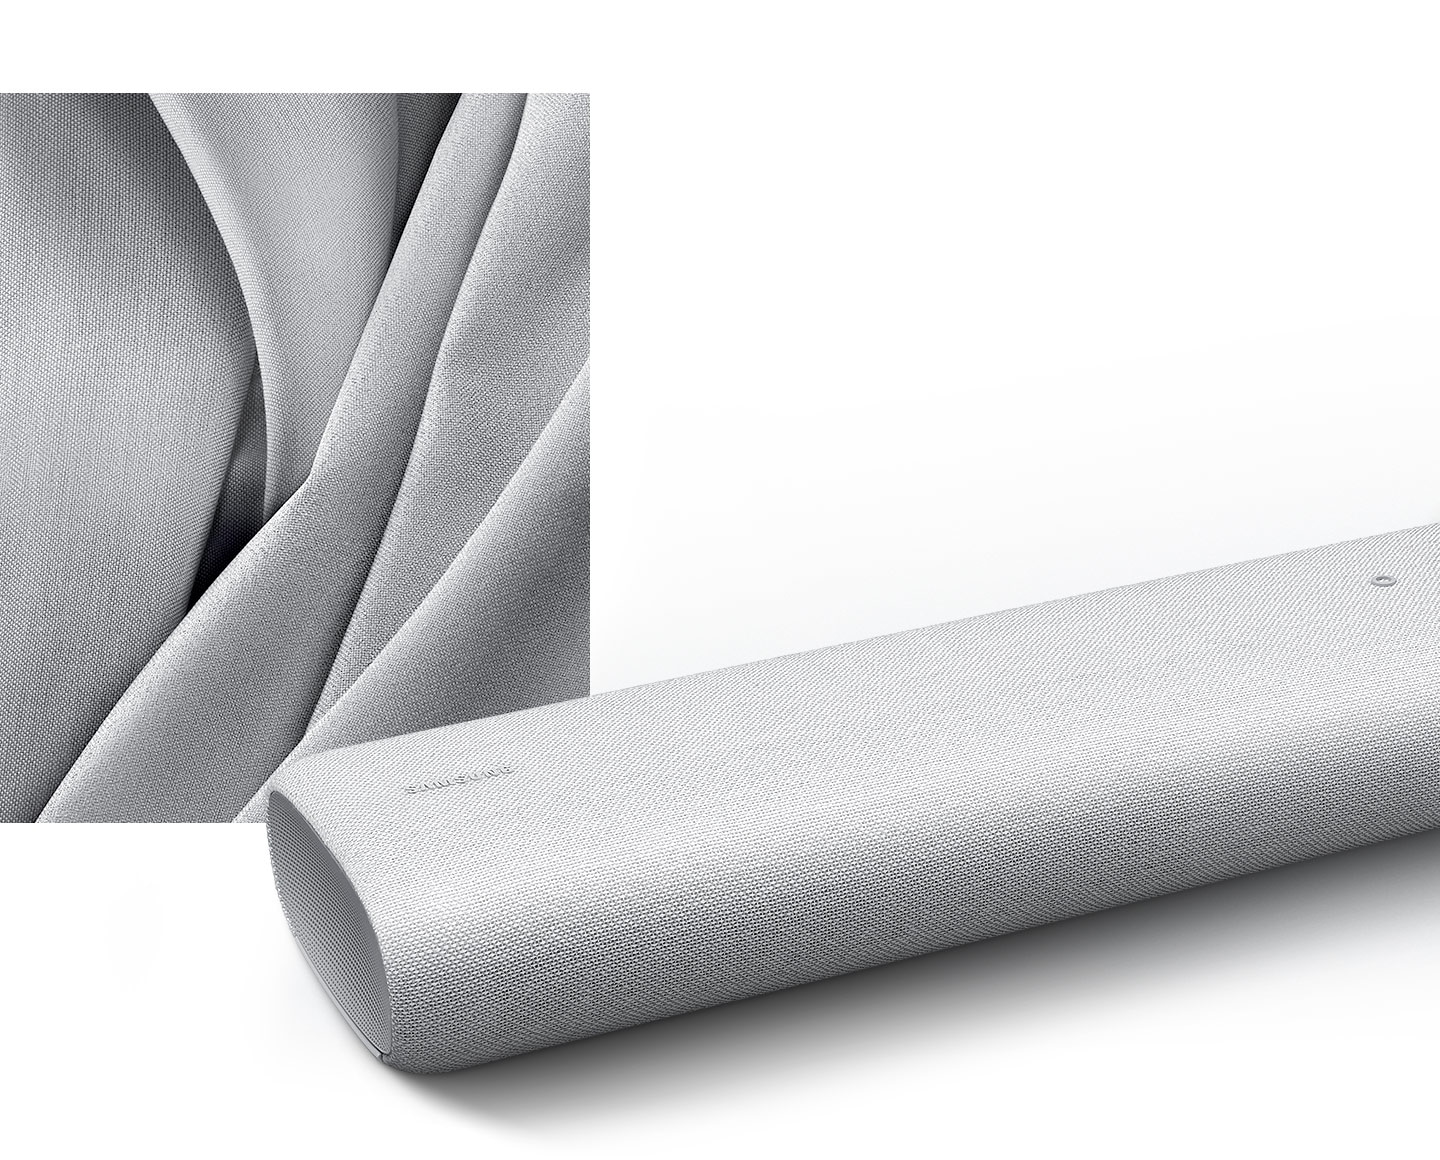 Closeup image of gray fabric material illustrates premium fabric design of S61A soundbar which is shown in front with Samsung logo visible.